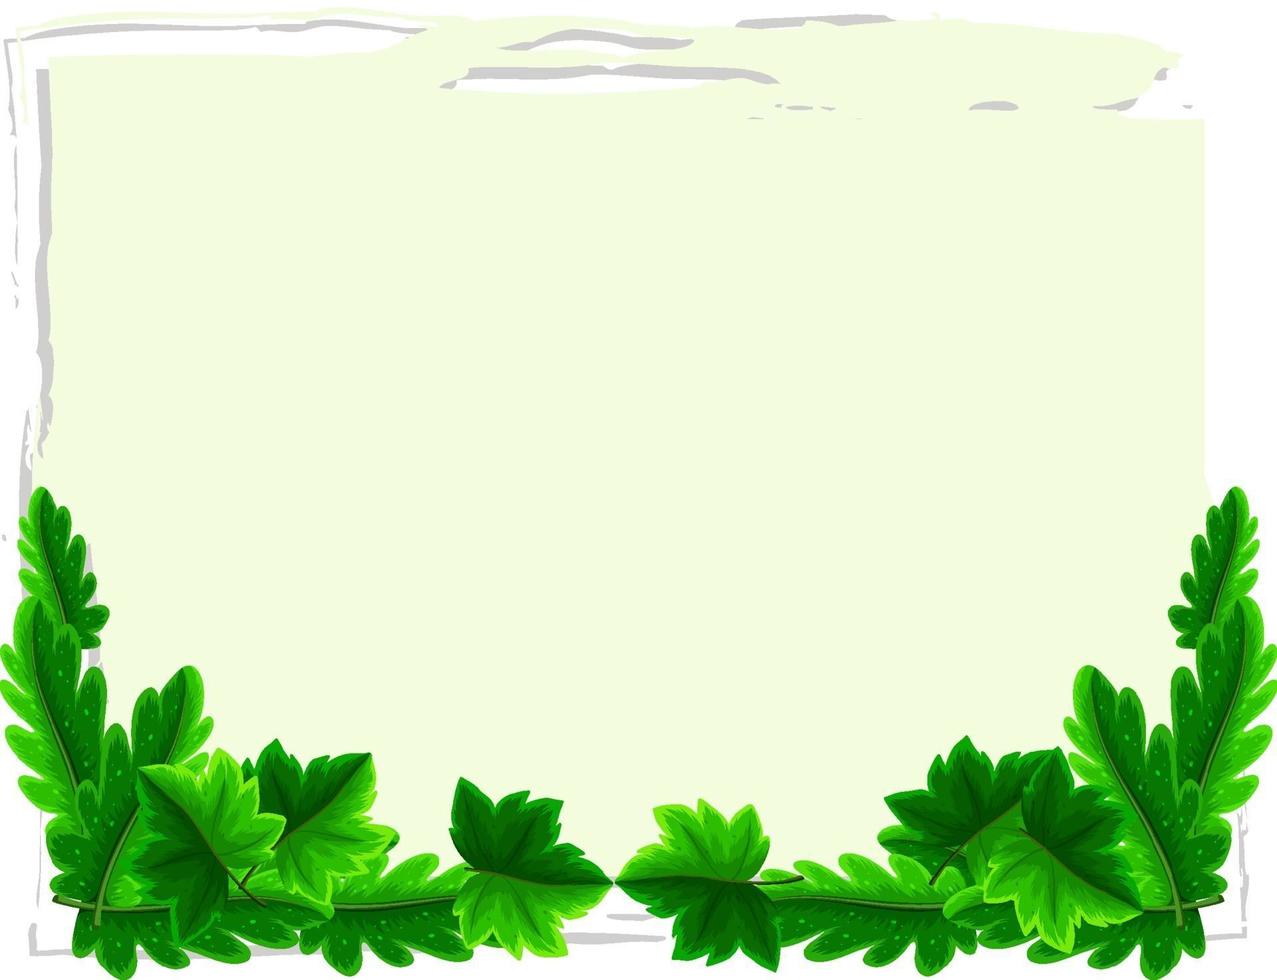 Empty banner with leaves elements on white background vector